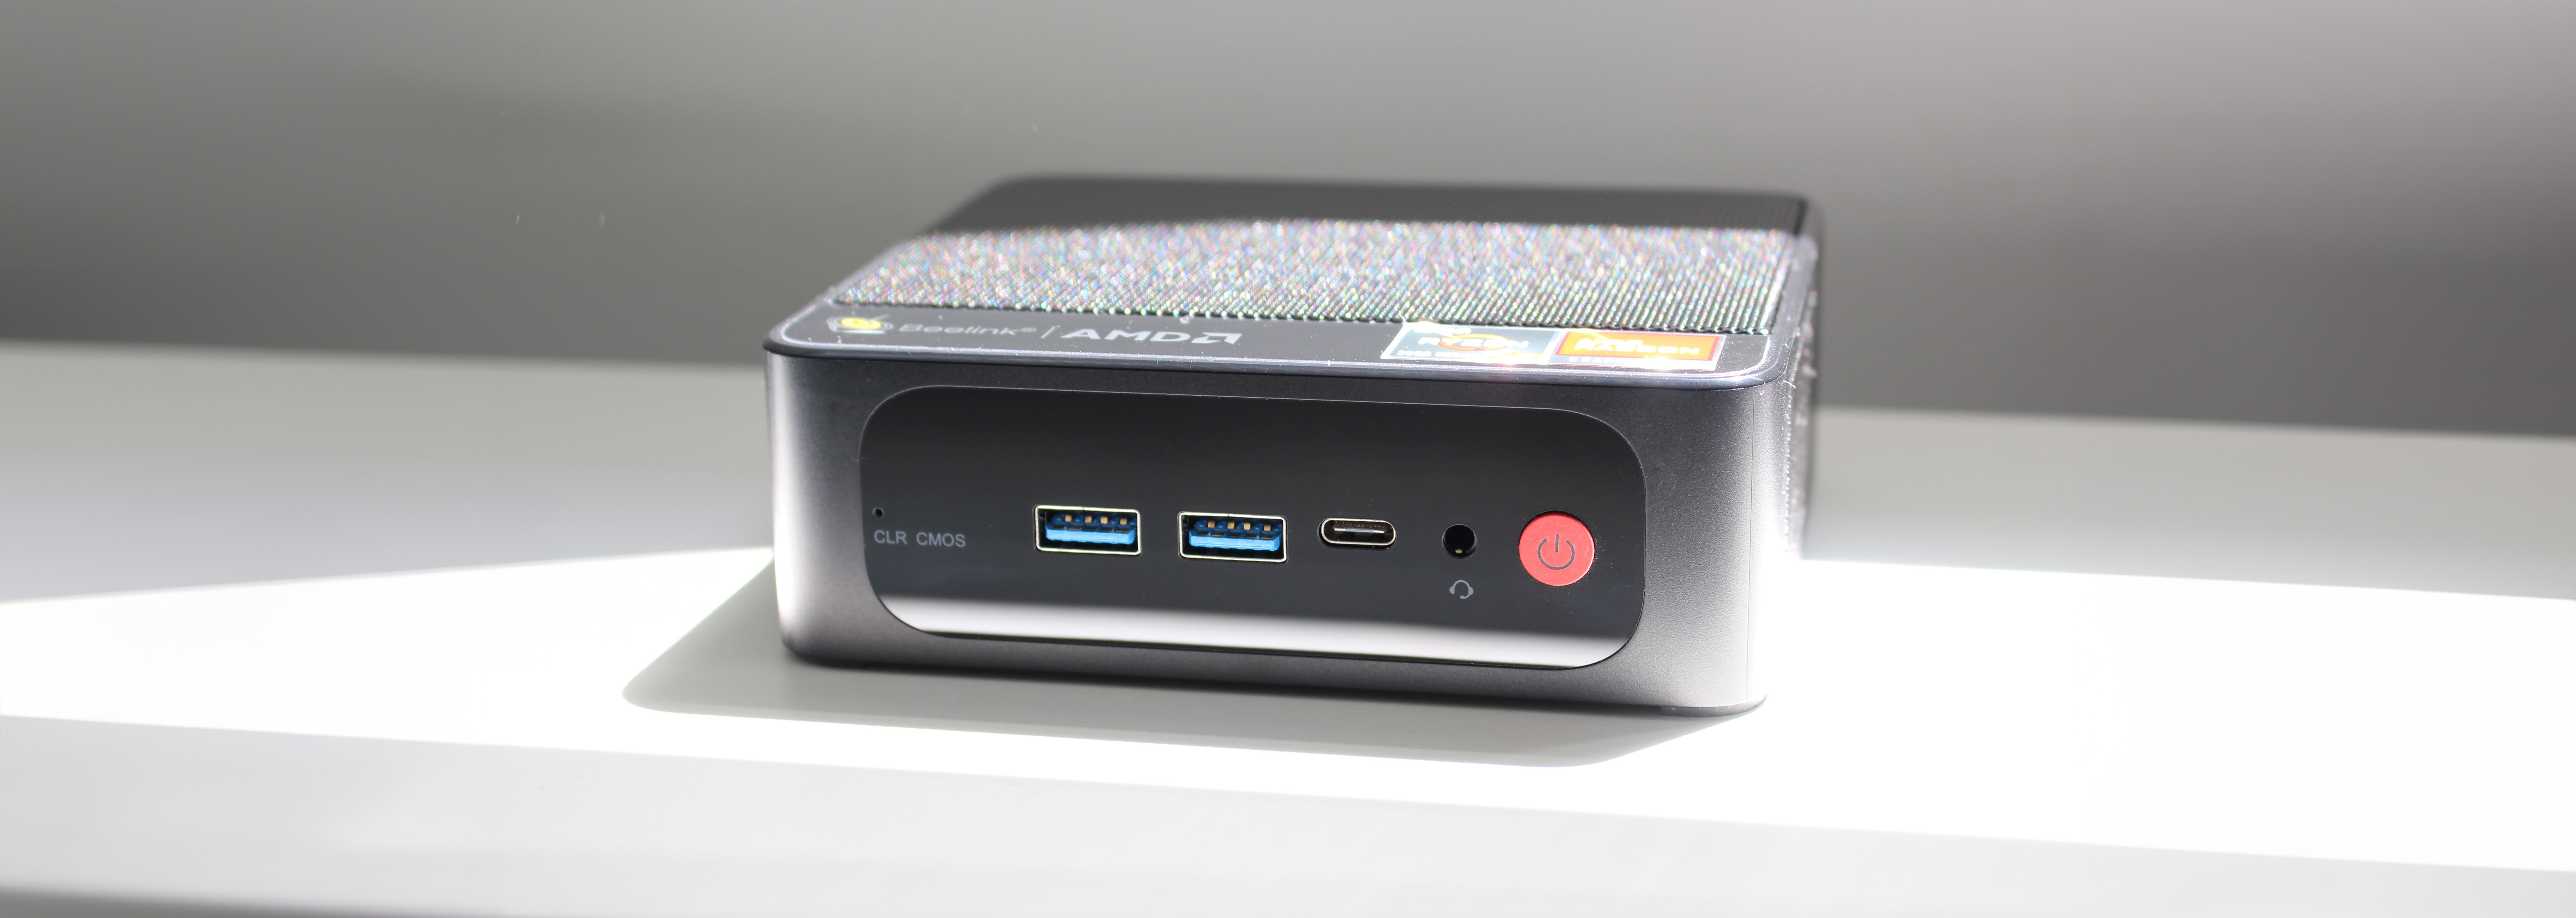 Beware of Quality Control Issues: Beelink Mini PC SER 5 PRO 5800H Review 